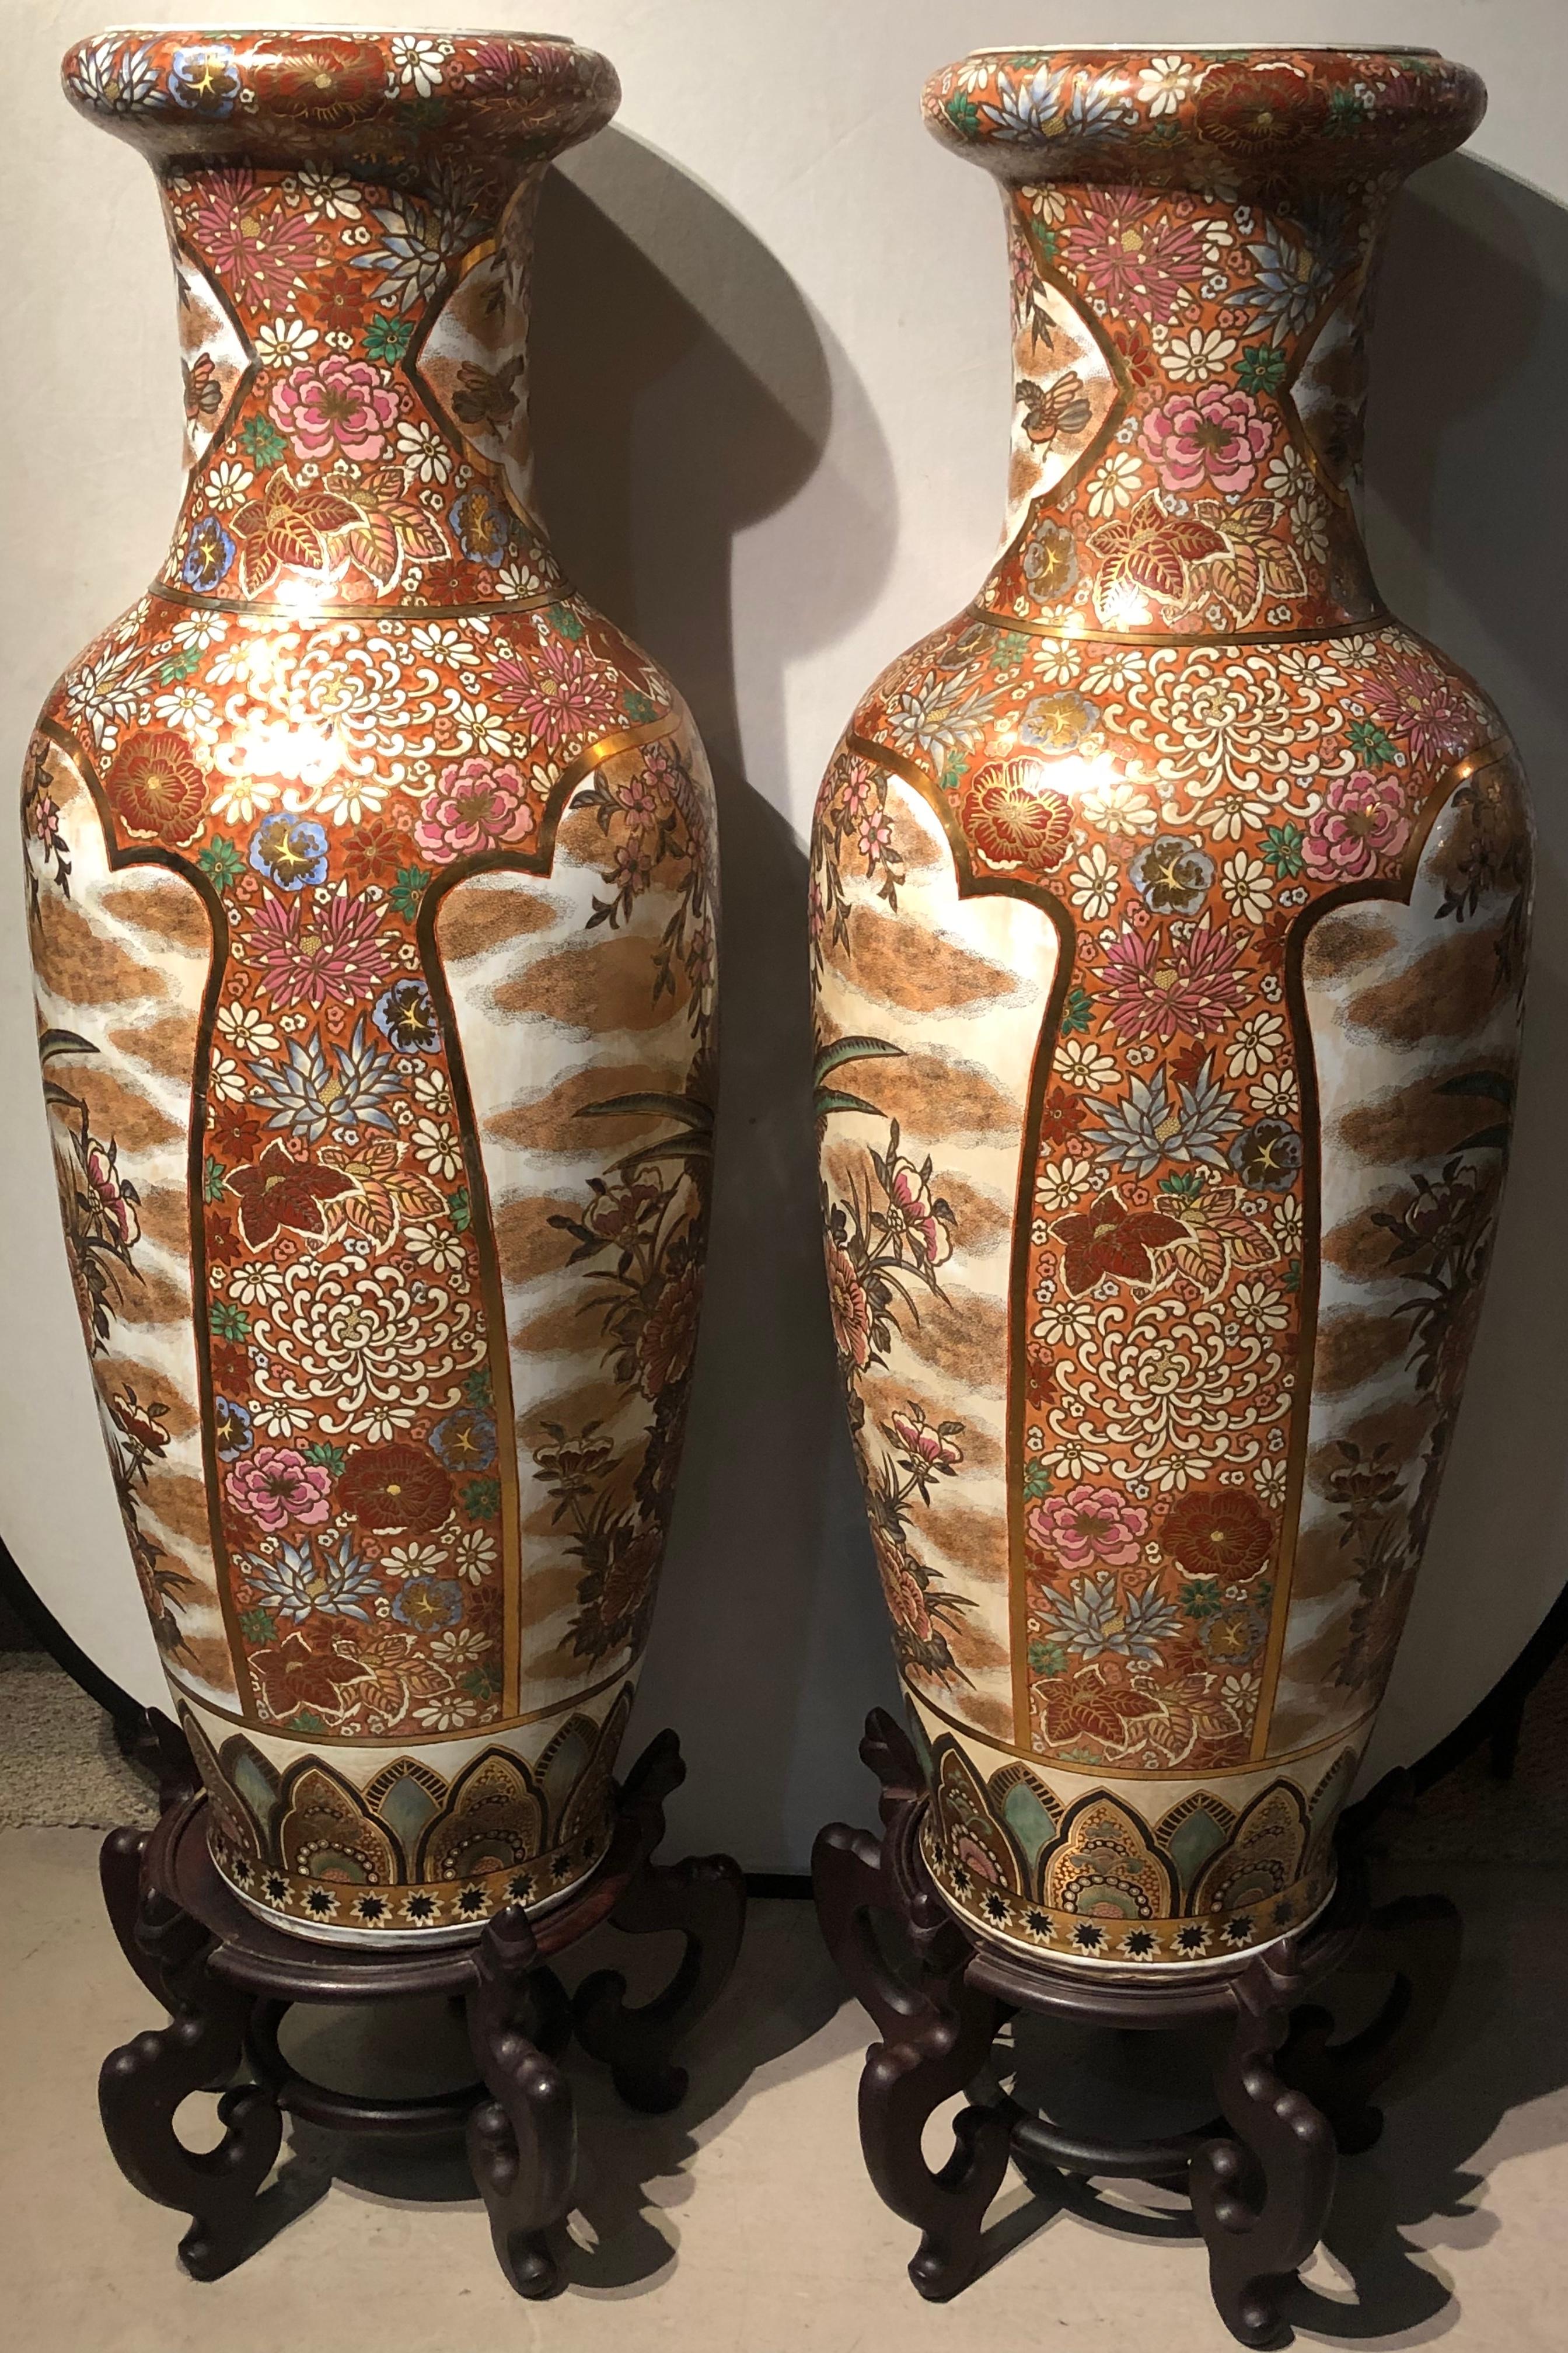 Chinese Export Pair of Chinese Palatial Vases Urns on Teak Pedestals Bird Decorated Signed Base